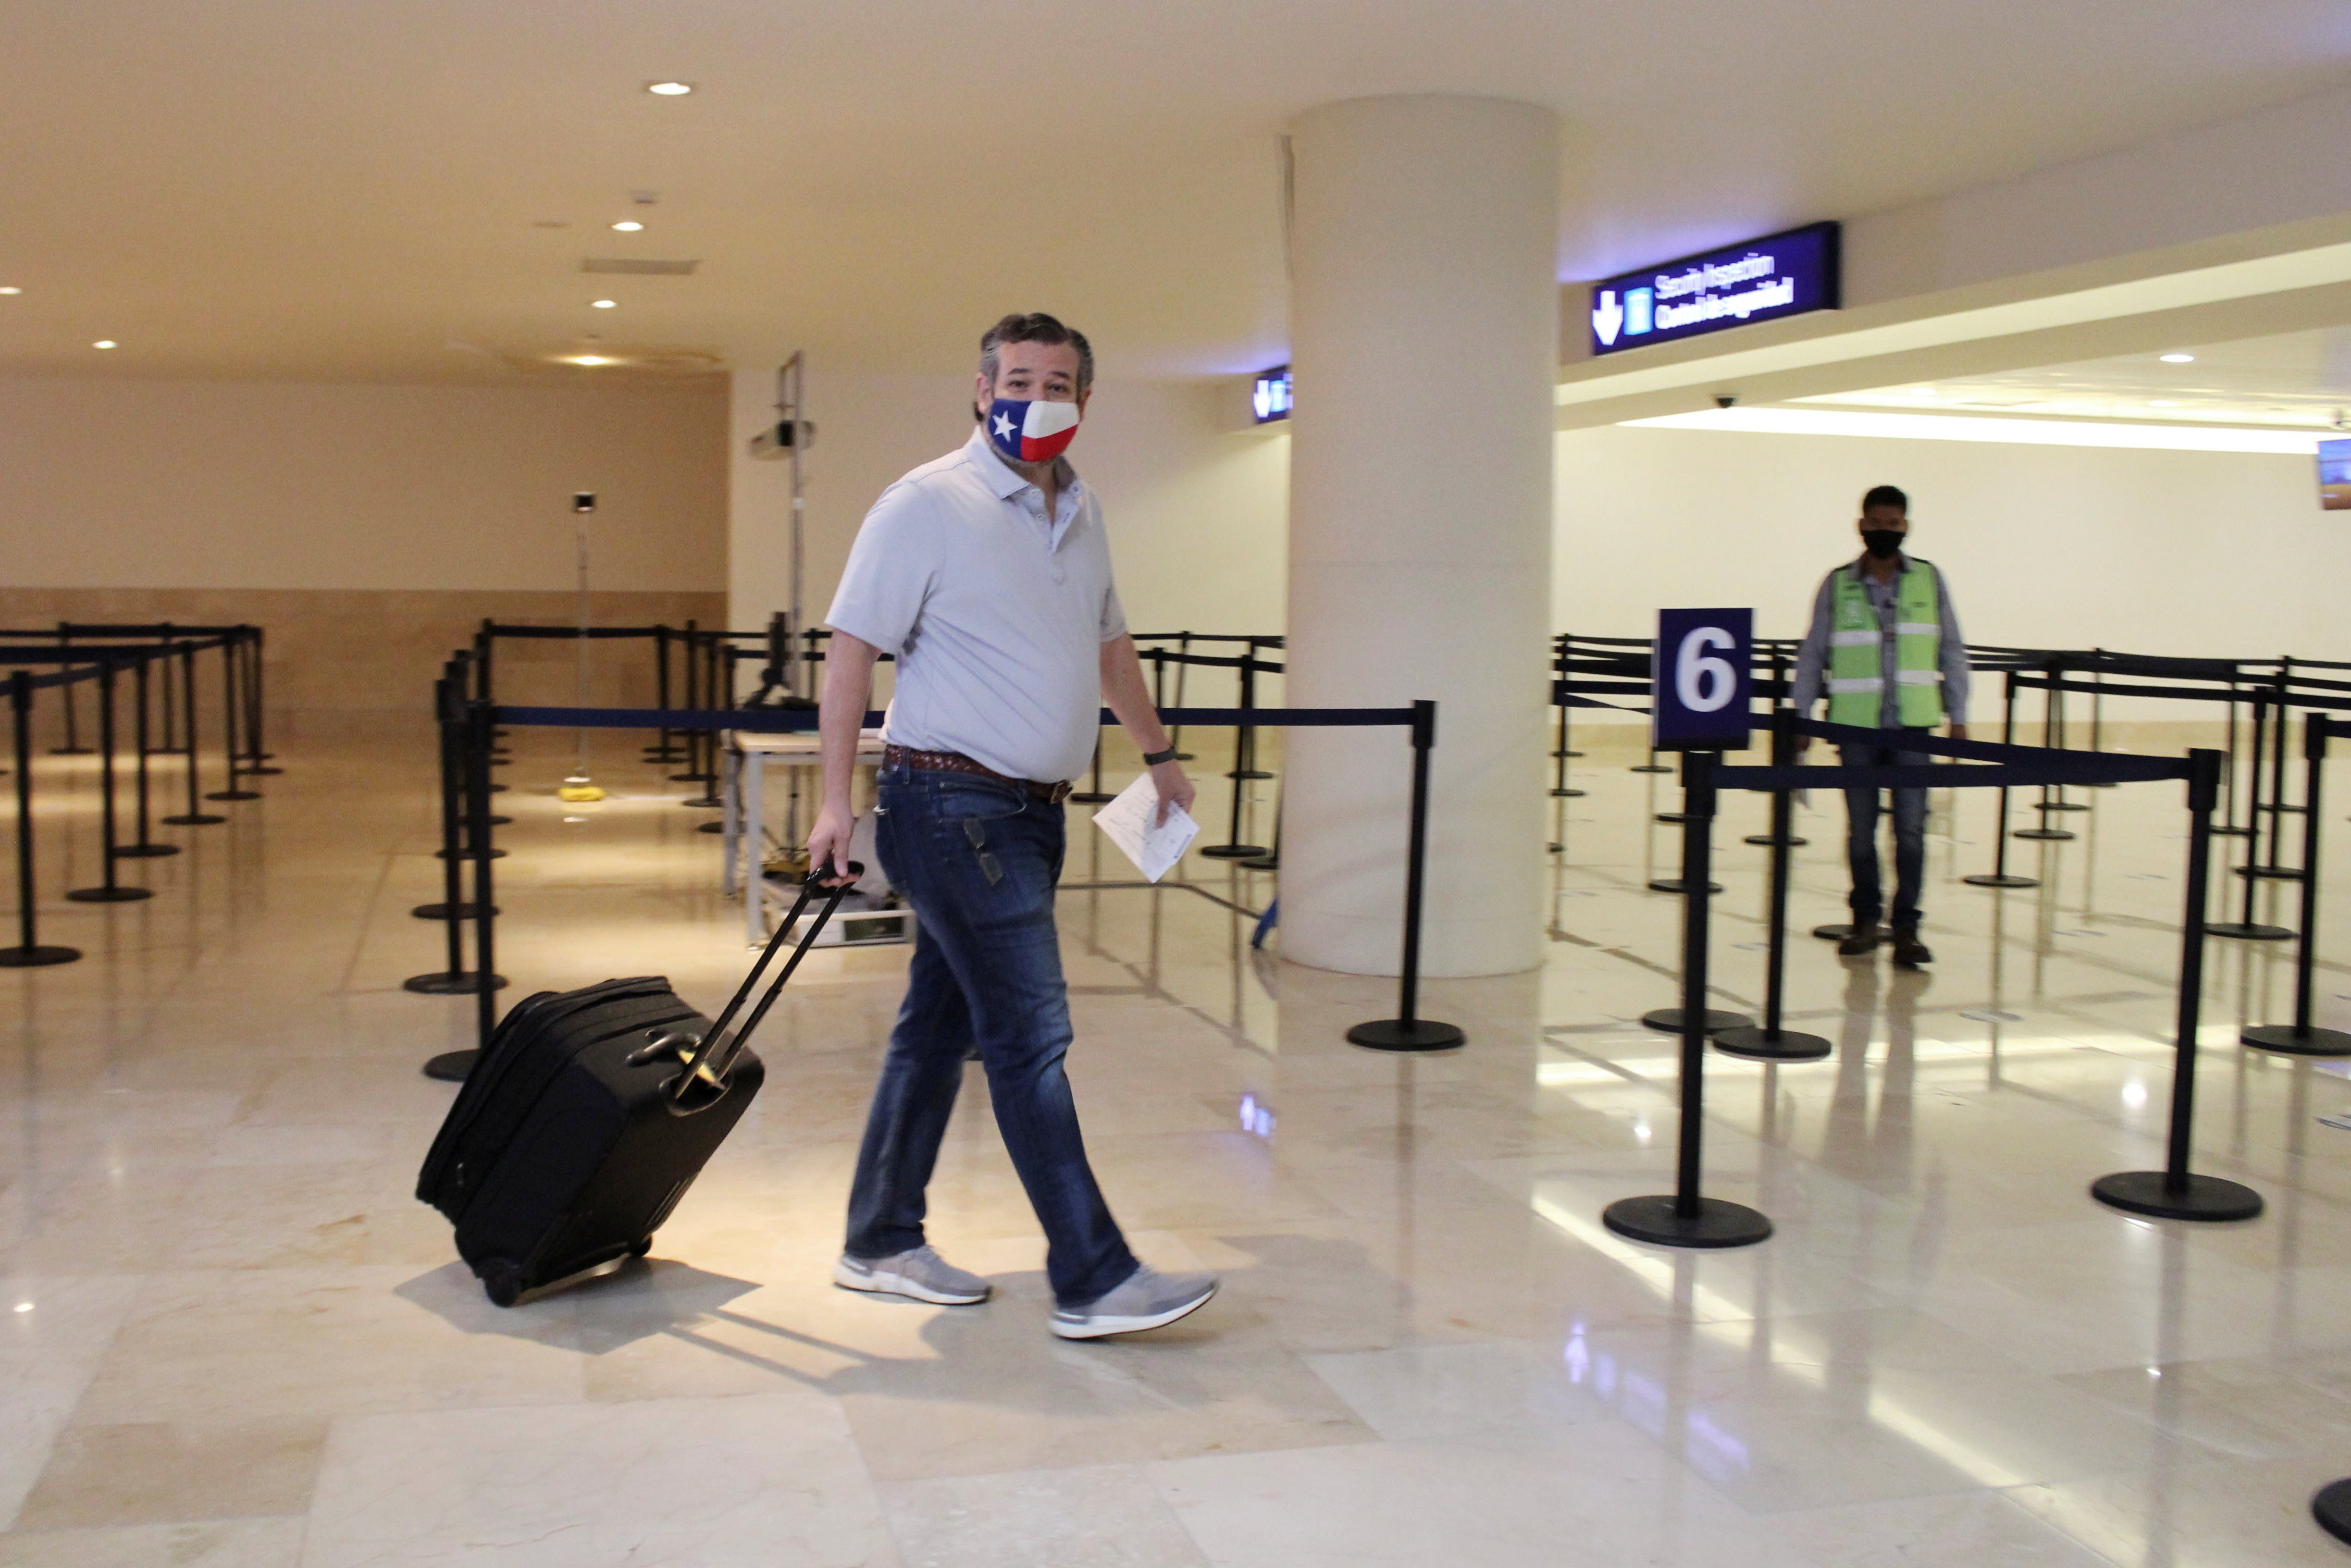 <p>U.S. Senator Ted Cruz (R-TX) carries his luggage at the Cancun International Airport before boarding his plane back to the U.S., in Cancun, Mexico February 18, 2021. </p>